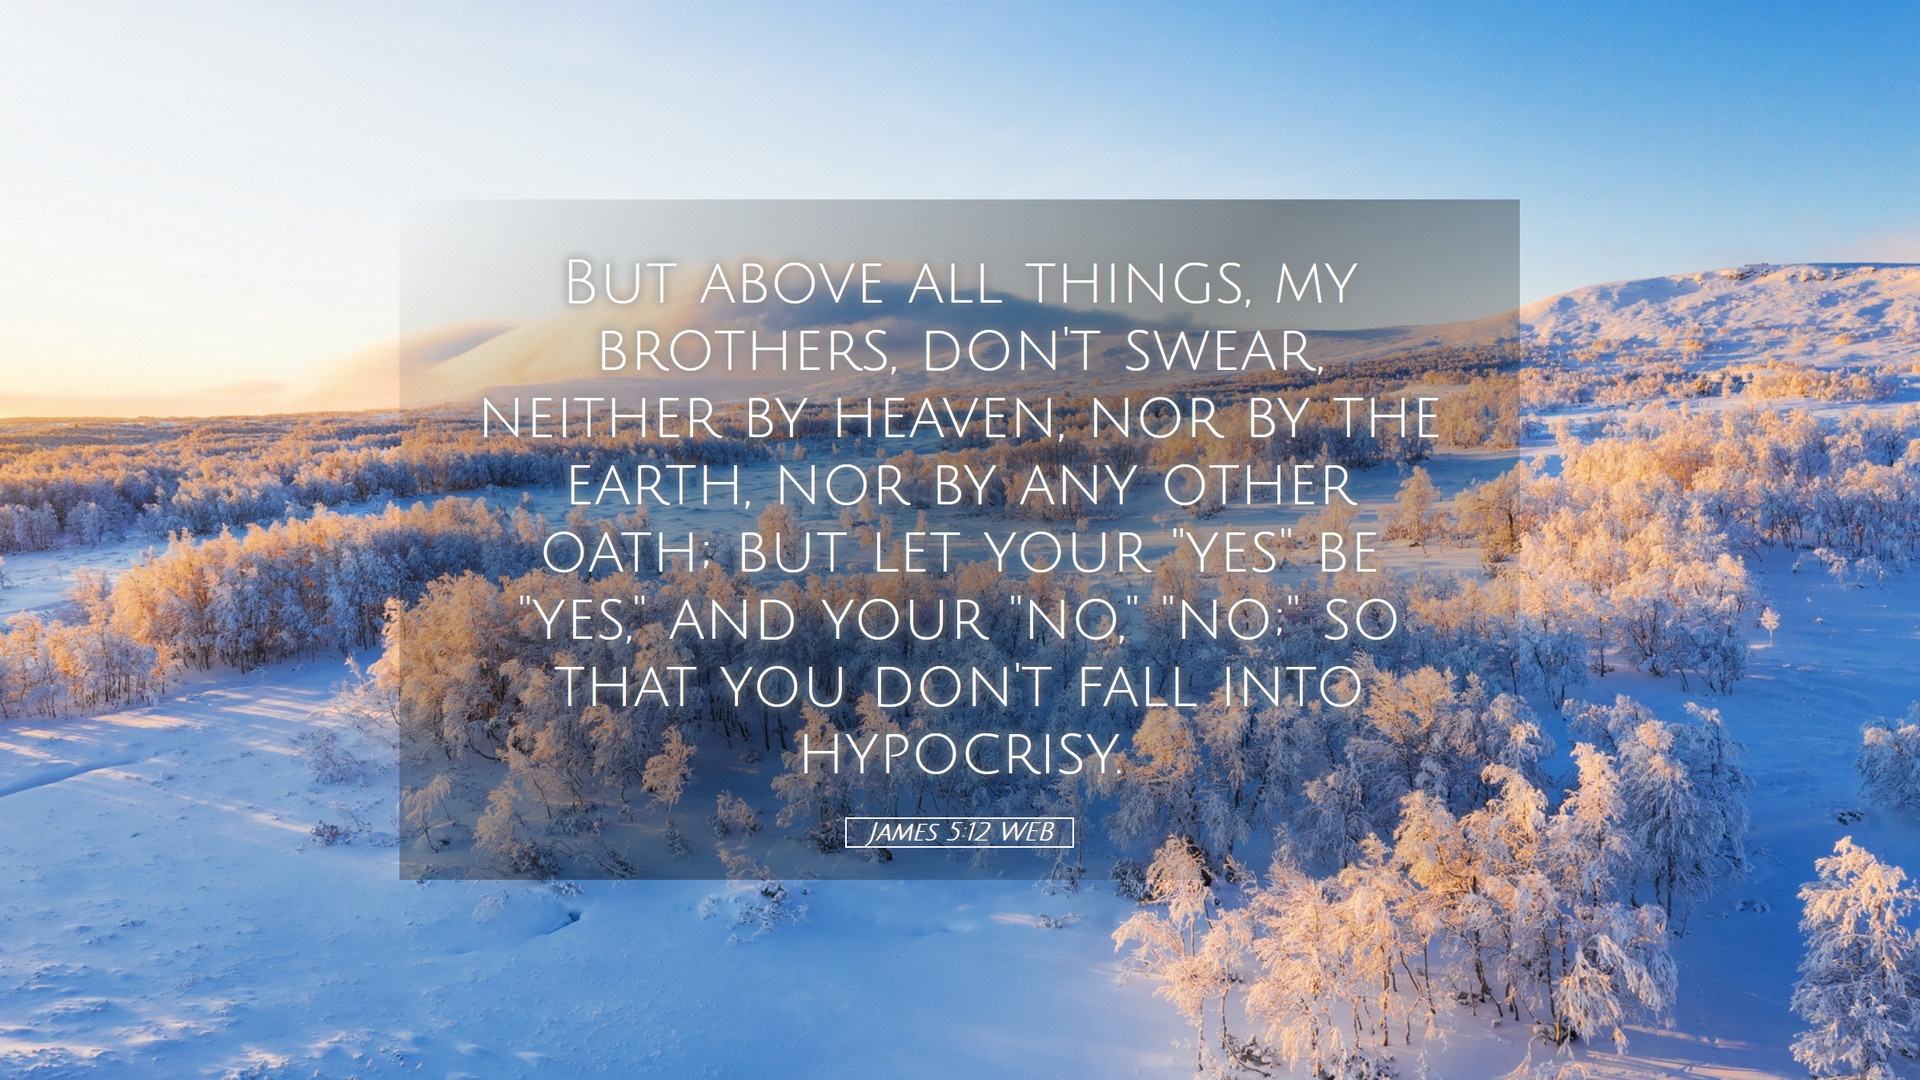 James 5:12 WEB Desktop Wallpaper above all things, my brothers, don't swear